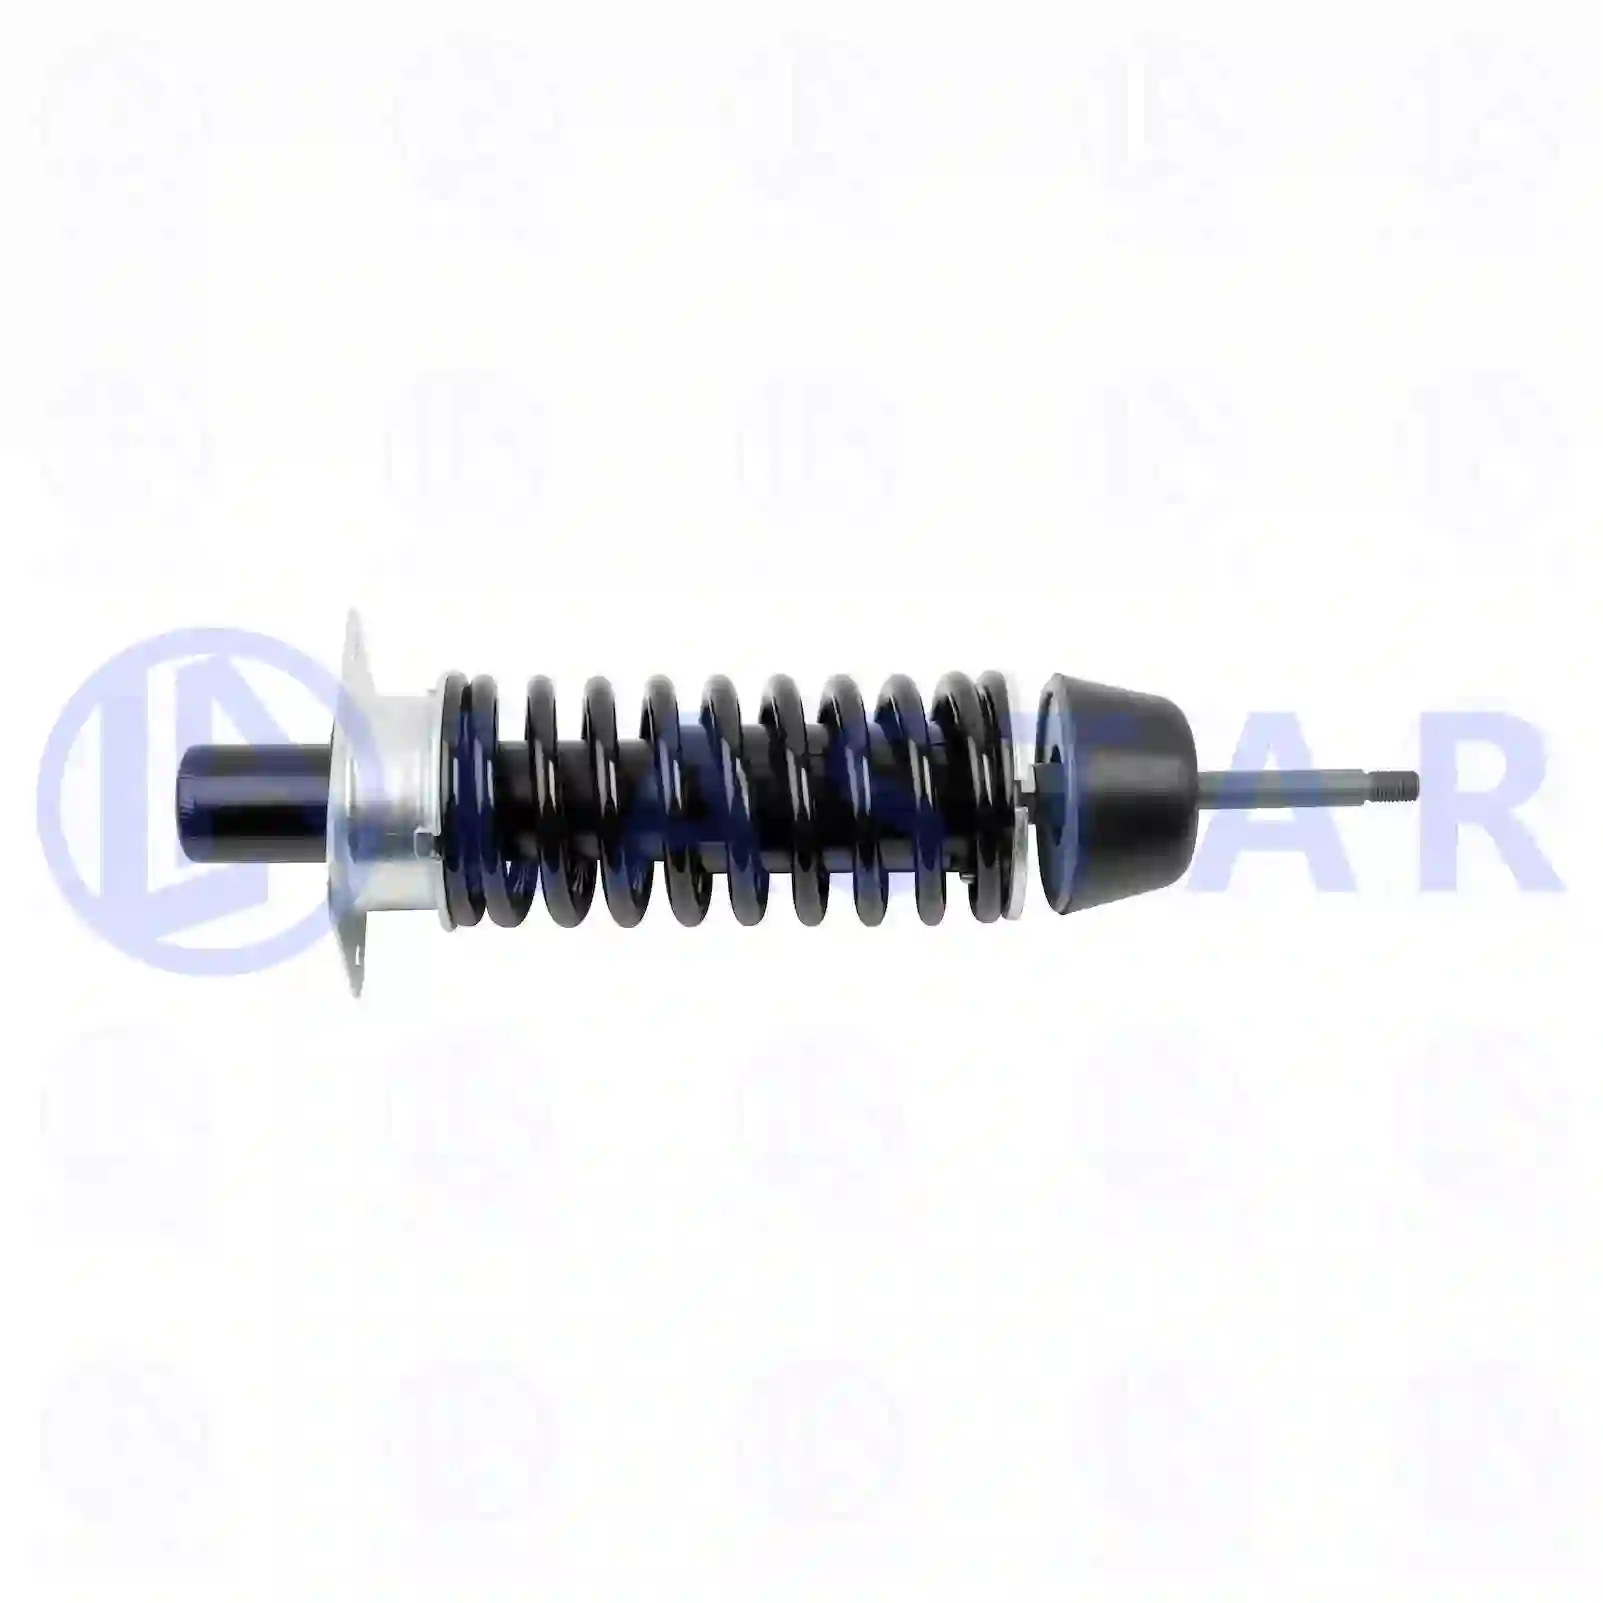 Cabin shock absorber, 77734810, 3818900719, 3818900919, 3878901019, 3878901219, 3878901319, 3878901519, 3878901619 ||  77734810 Lastar Spare Part | Truck Spare Parts, Auotomotive Spare Parts Cabin shock absorber, 77734810, 3818900719, 3818900919, 3878901019, 3878901219, 3878901319, 3878901519, 3878901619 ||  77734810 Lastar Spare Part | Truck Spare Parts, Auotomotive Spare Parts